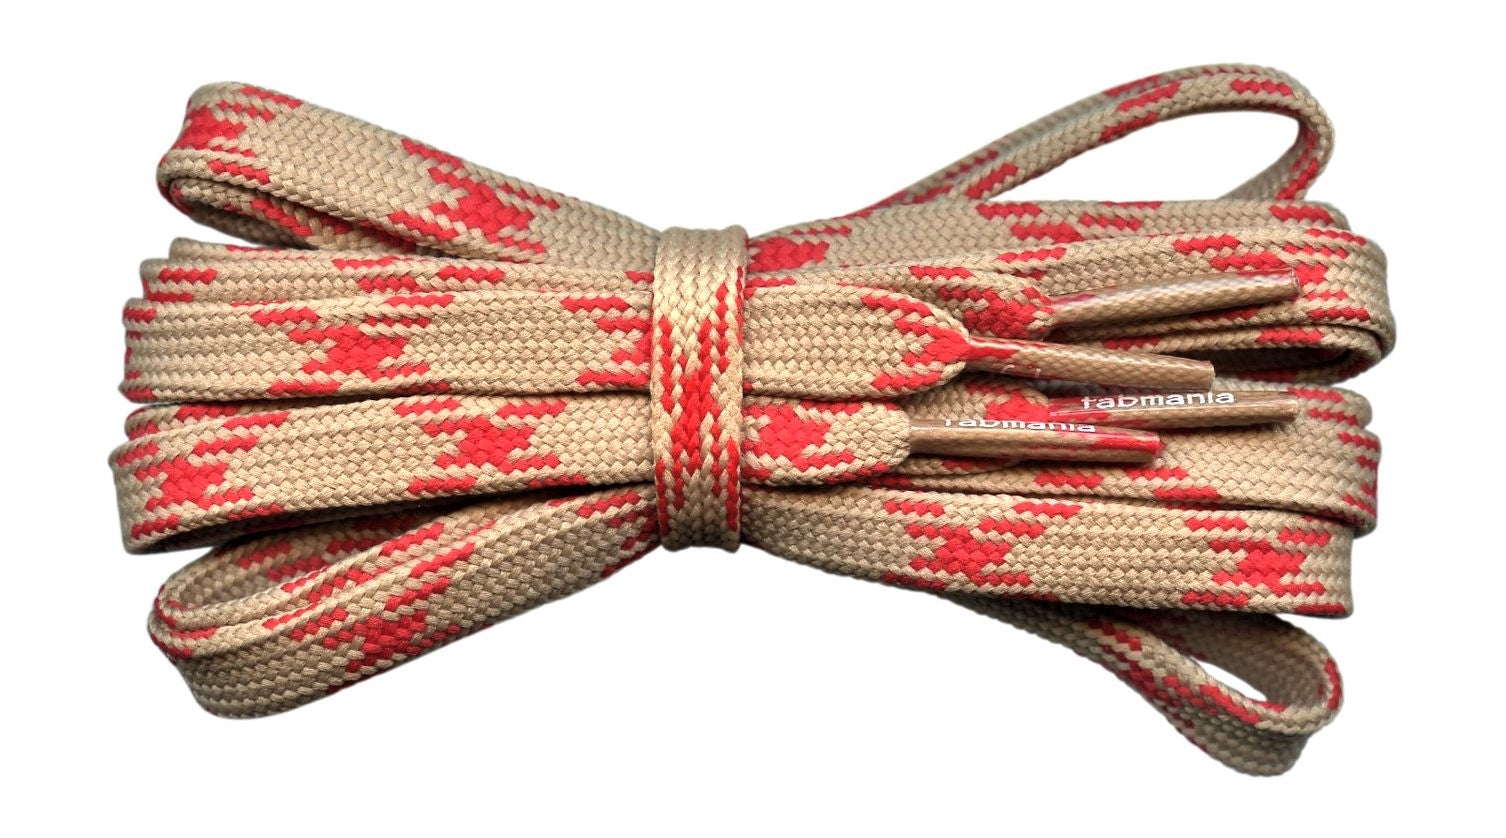 Flat Hiking boot Laces Oatmeal and Red design - fabmania shoe laces